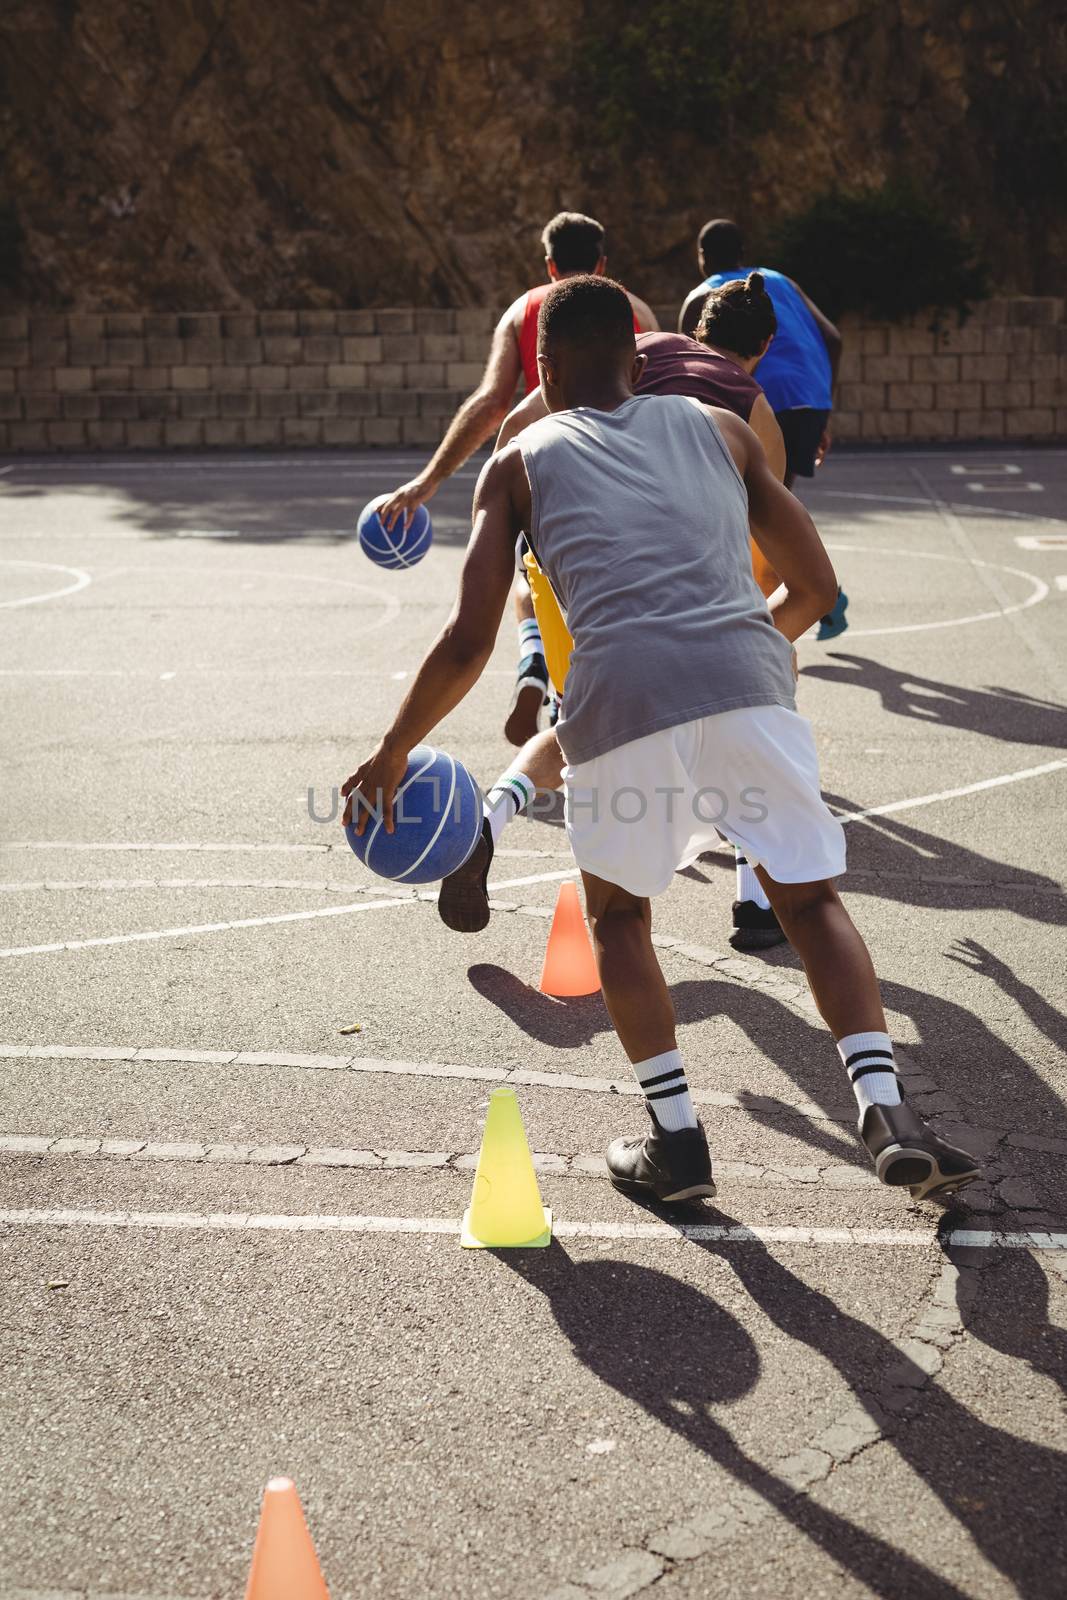 Basketball players practicing dribbling drill  in basketball court outdoors